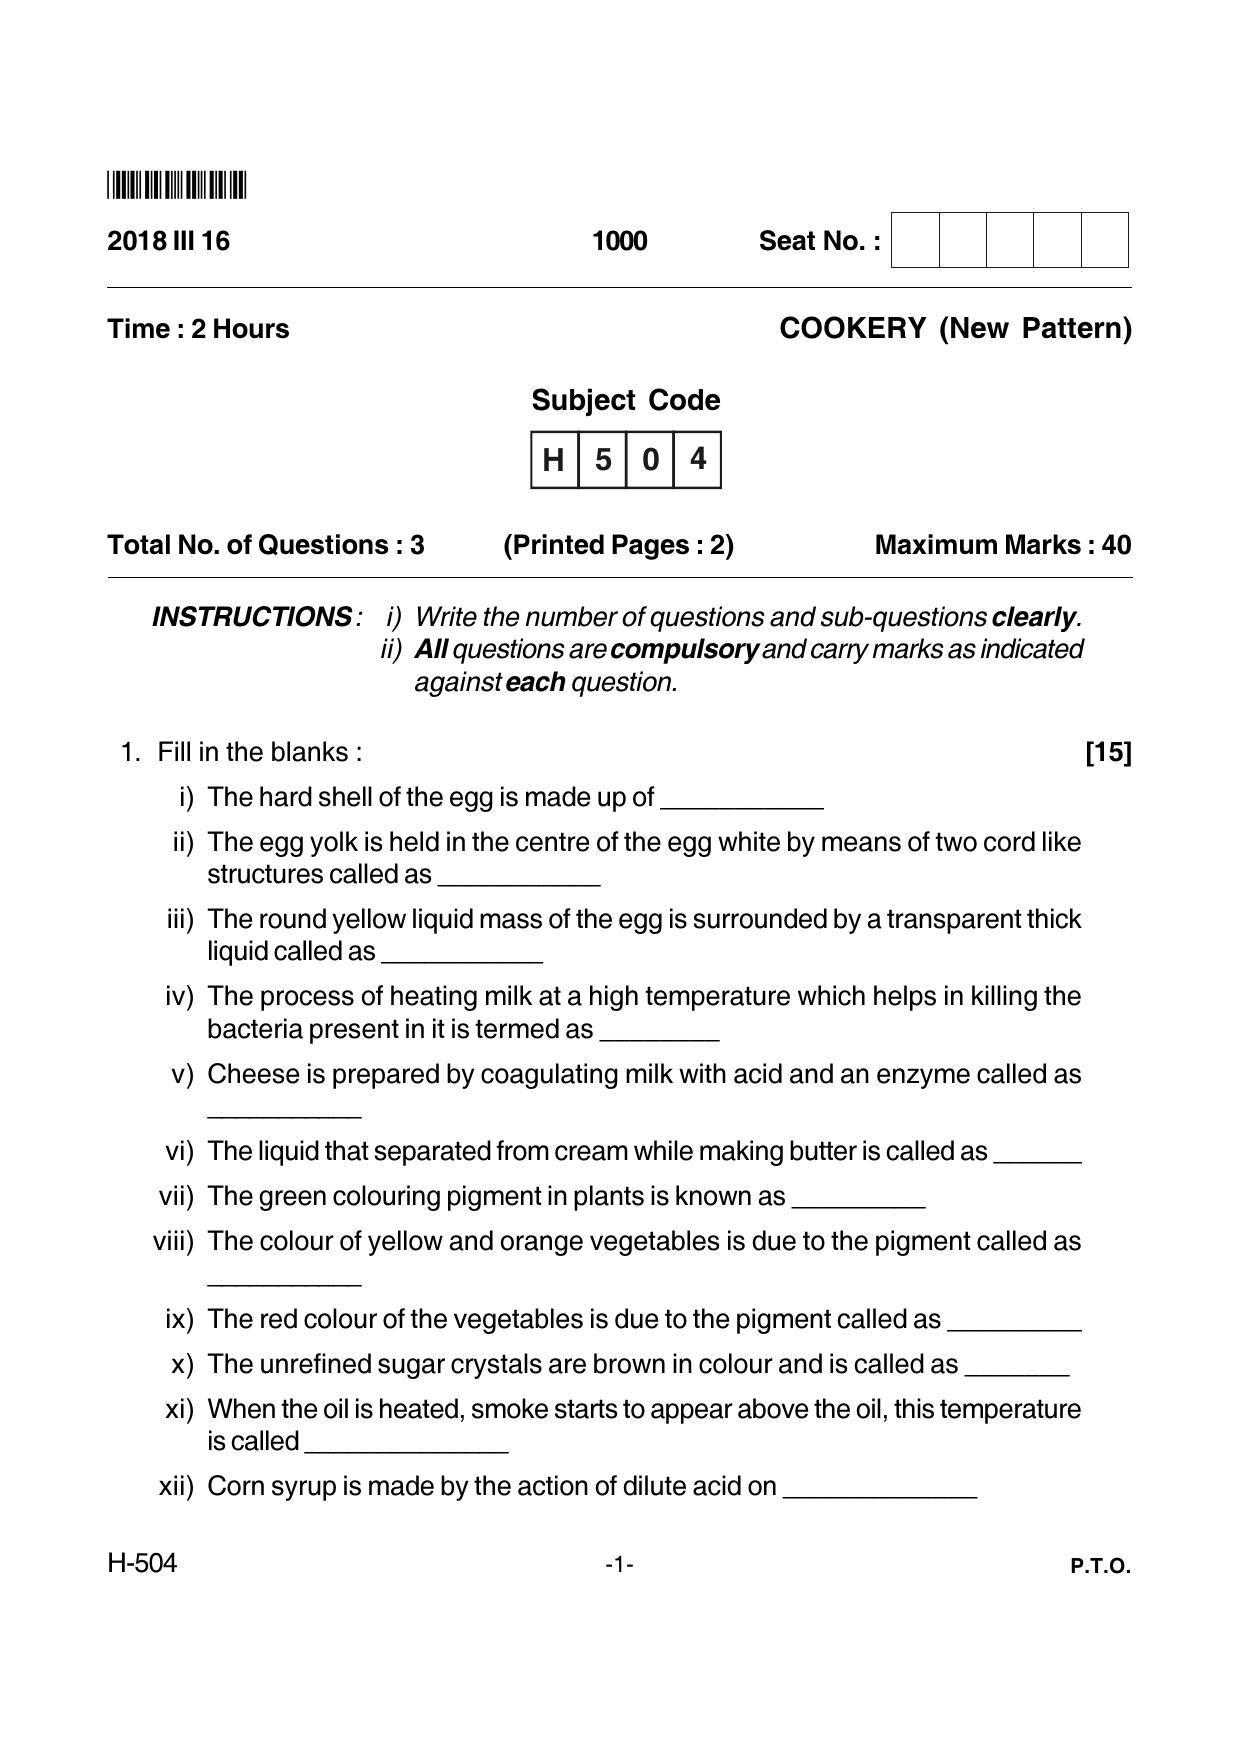 Goa Board Class 12 Cookery  504 New Pattern (March 2018) Question Paper - Page 1